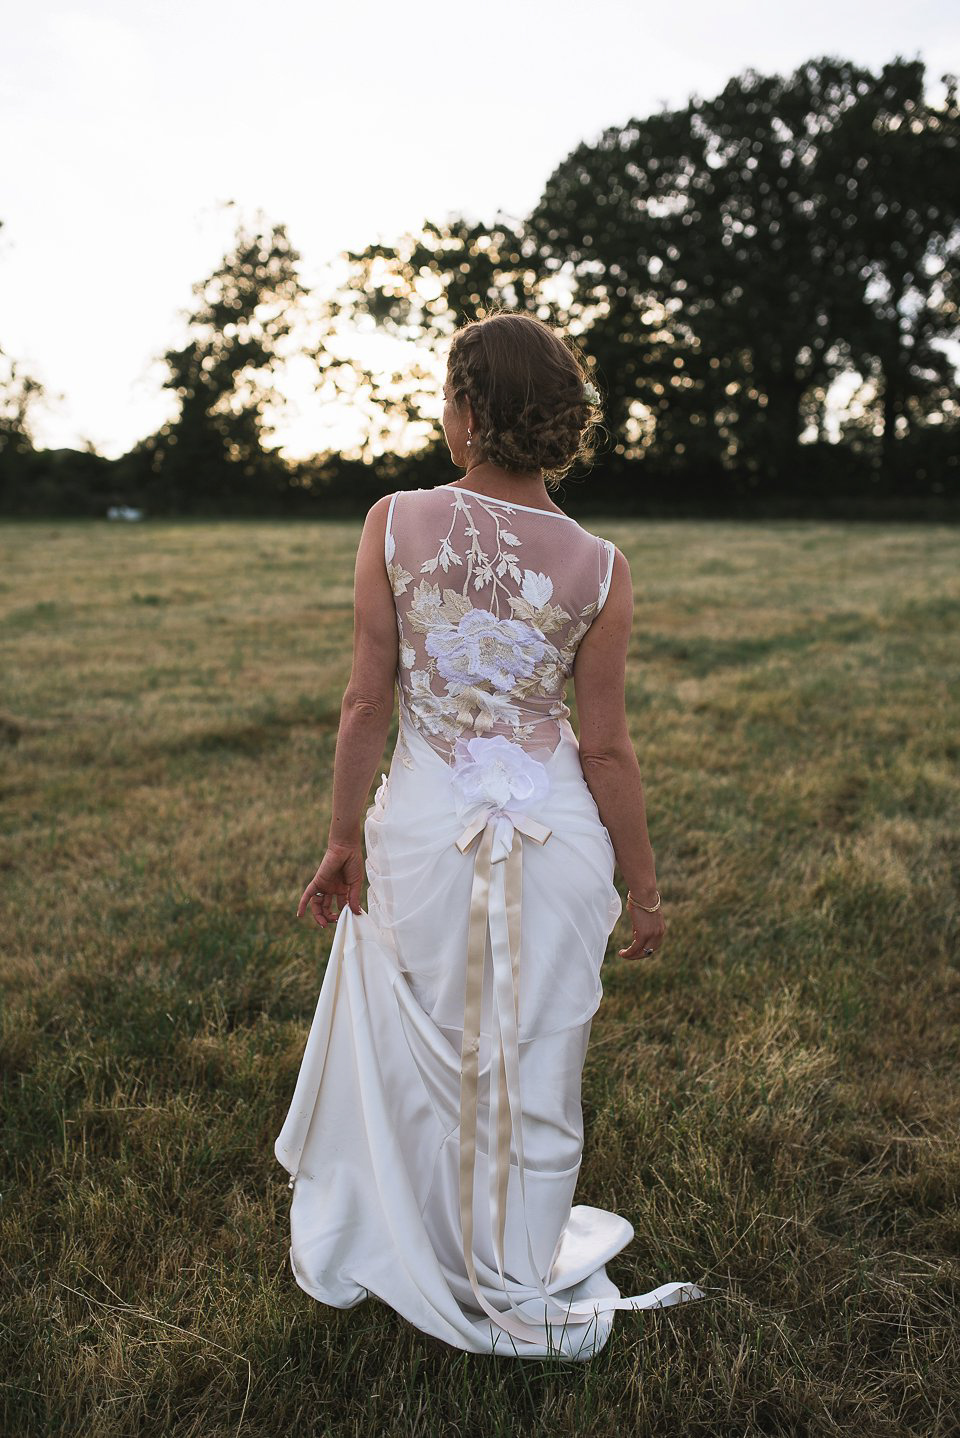 Bryony wore a gown with a floral back by Claire Pettibone from Blackburn Bridal for her Summer wedding held at her husband's family home. Photography by Kristian Leven.